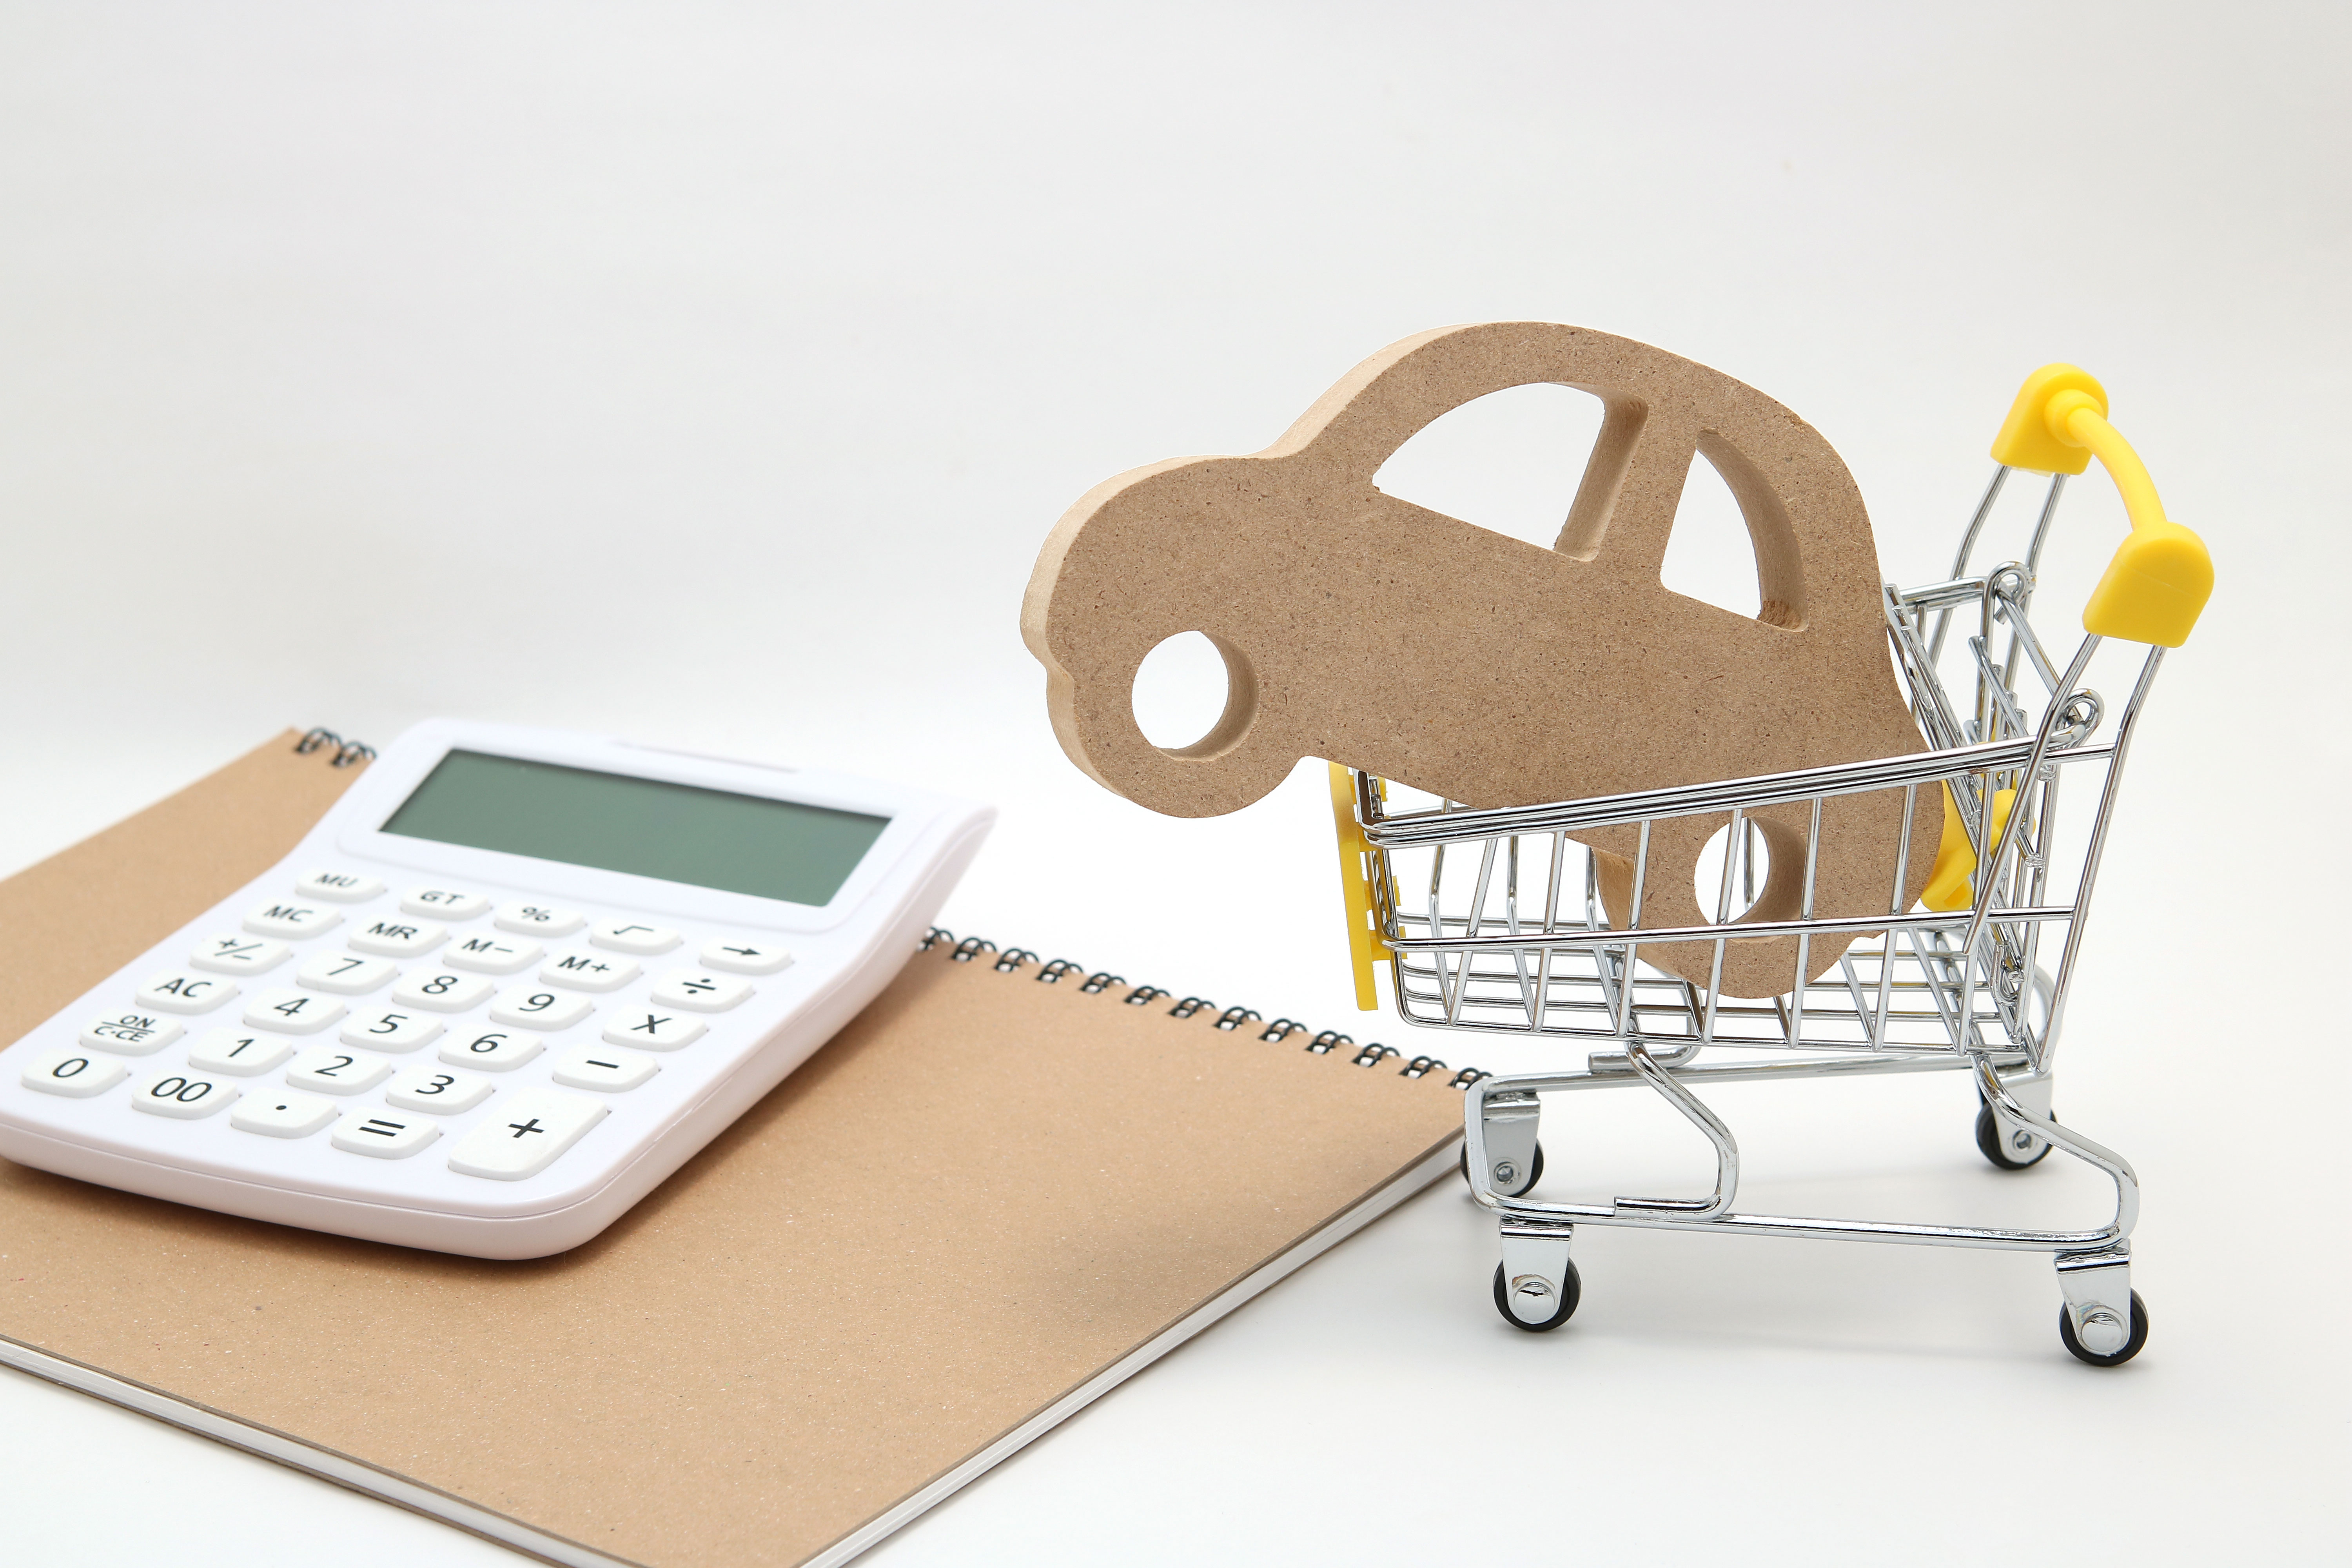 A wooden car cutout placed inside a small shopping cart next to a calculator and a notebook.